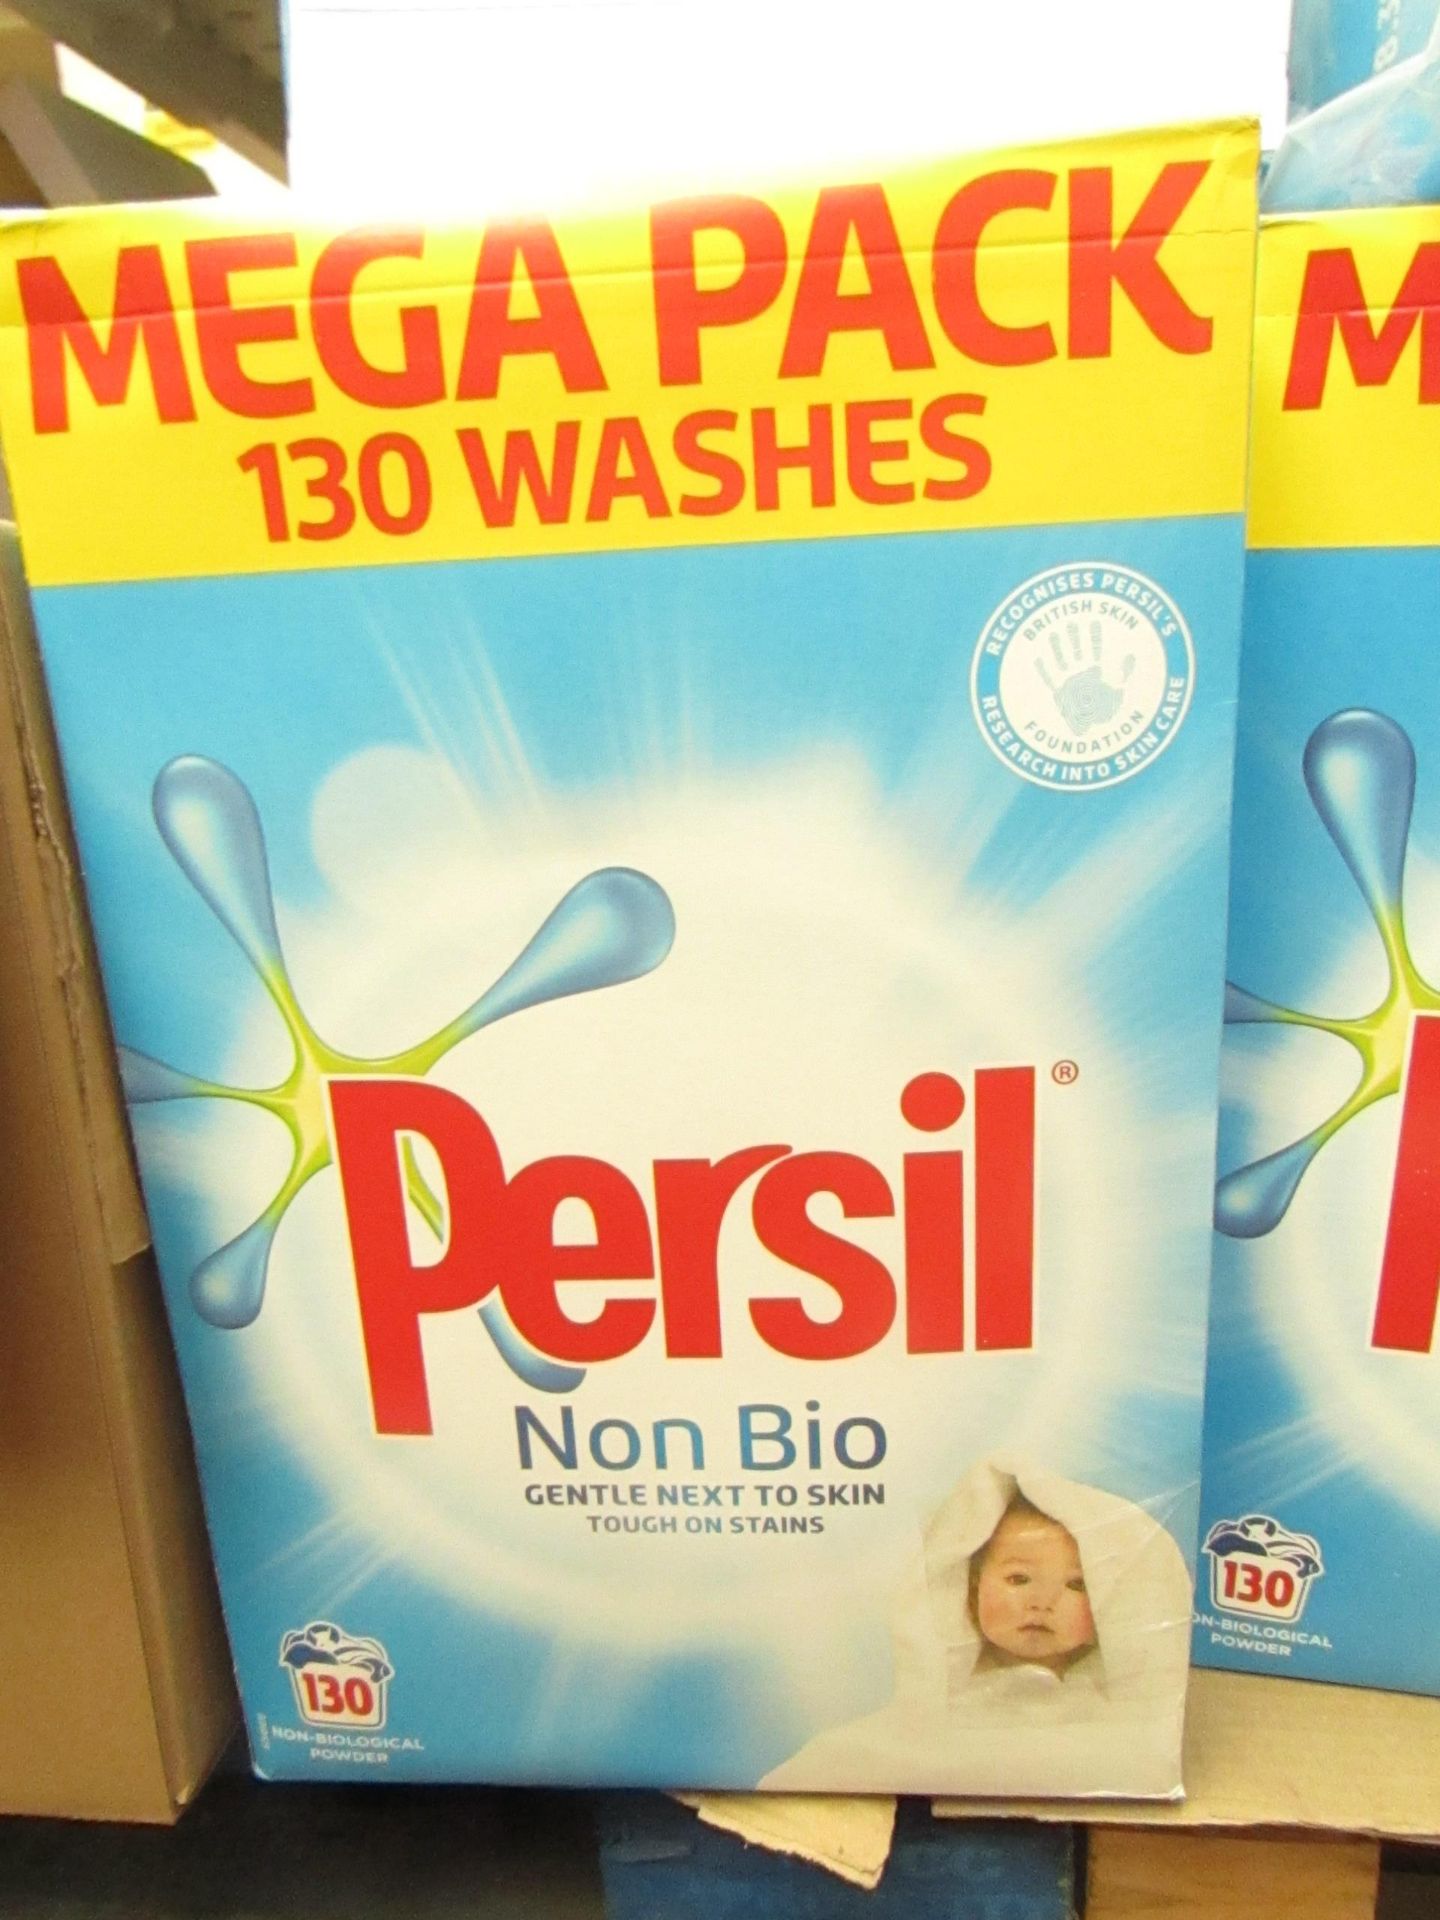 8.385kg Persil NonBio Washing Powder. 130 washes. Box has split but has been bagged up.